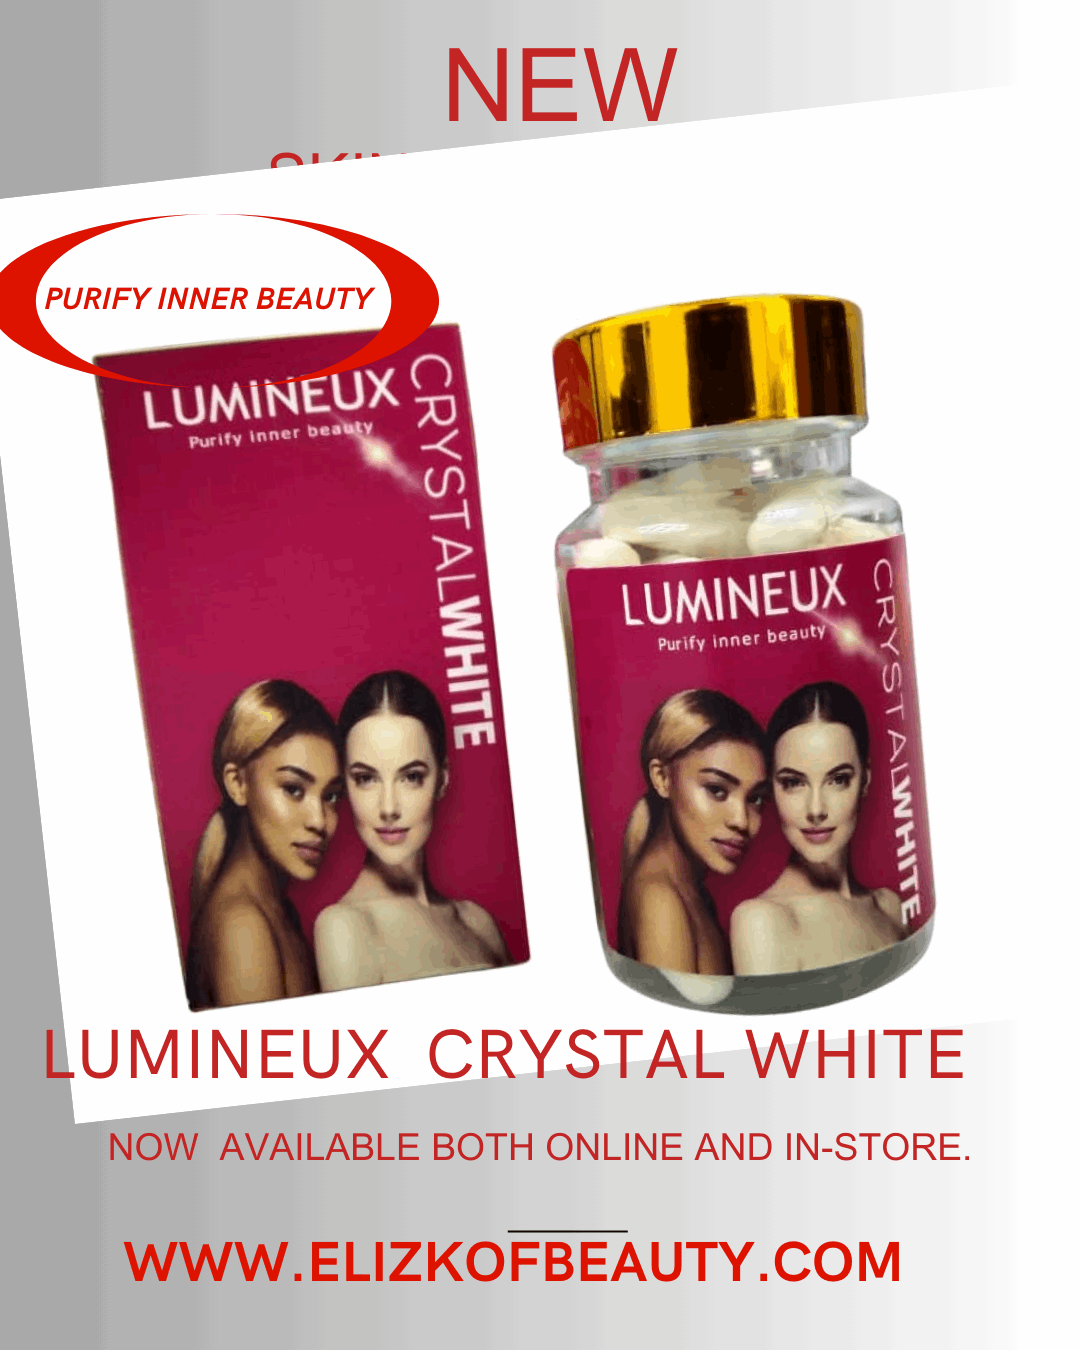 LUMINEUX CRYSTAL WHITE - Purity inner beauty